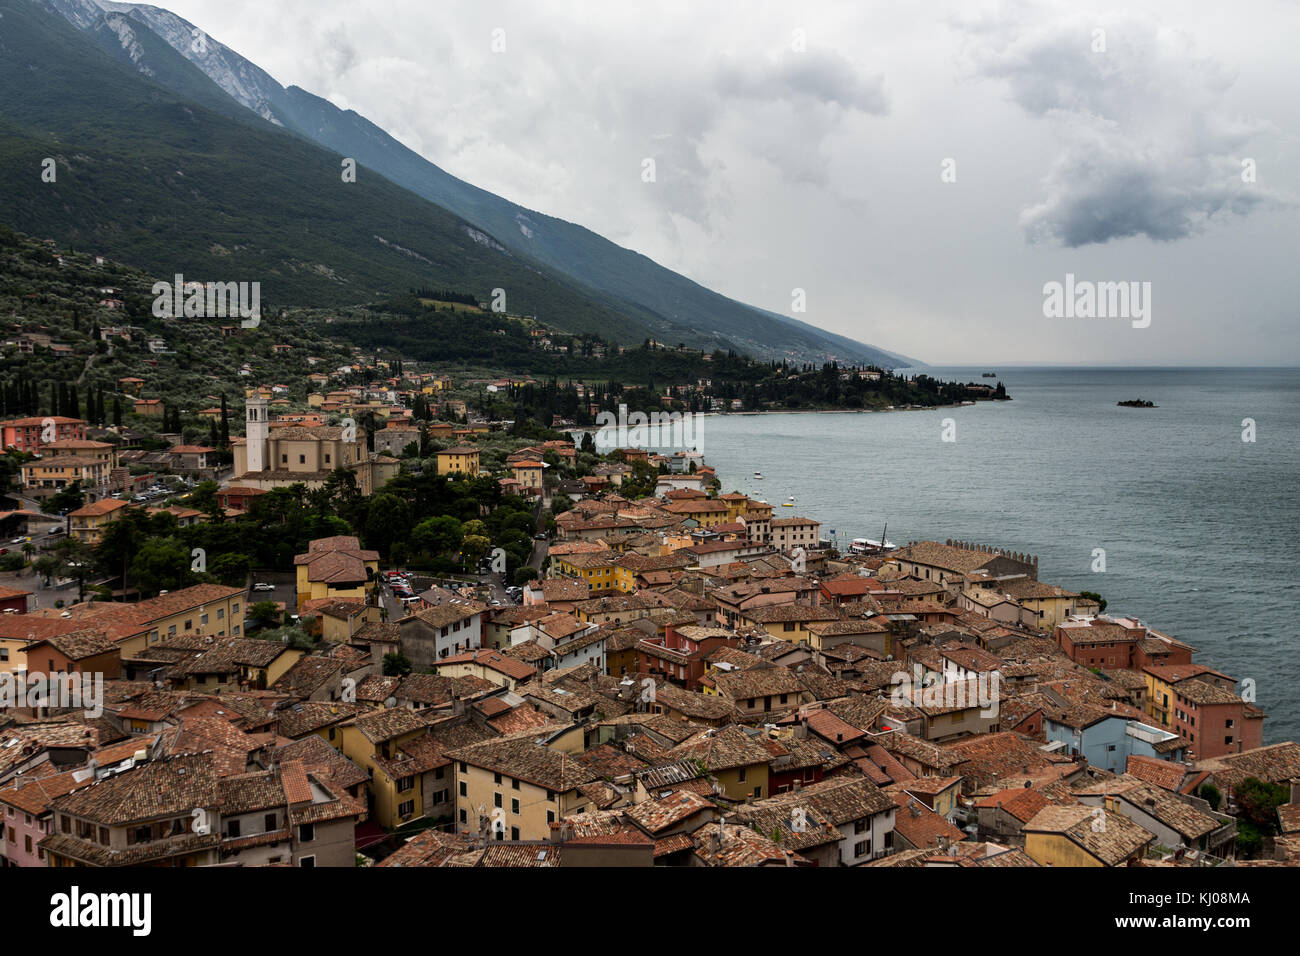 View over the Malcesine town and lake Garda from the Scaliger Castle, Lake Garda, Italy  gardalakemalcesineitalyyachtactiveattractionbeautifulblueboat Stock Photo